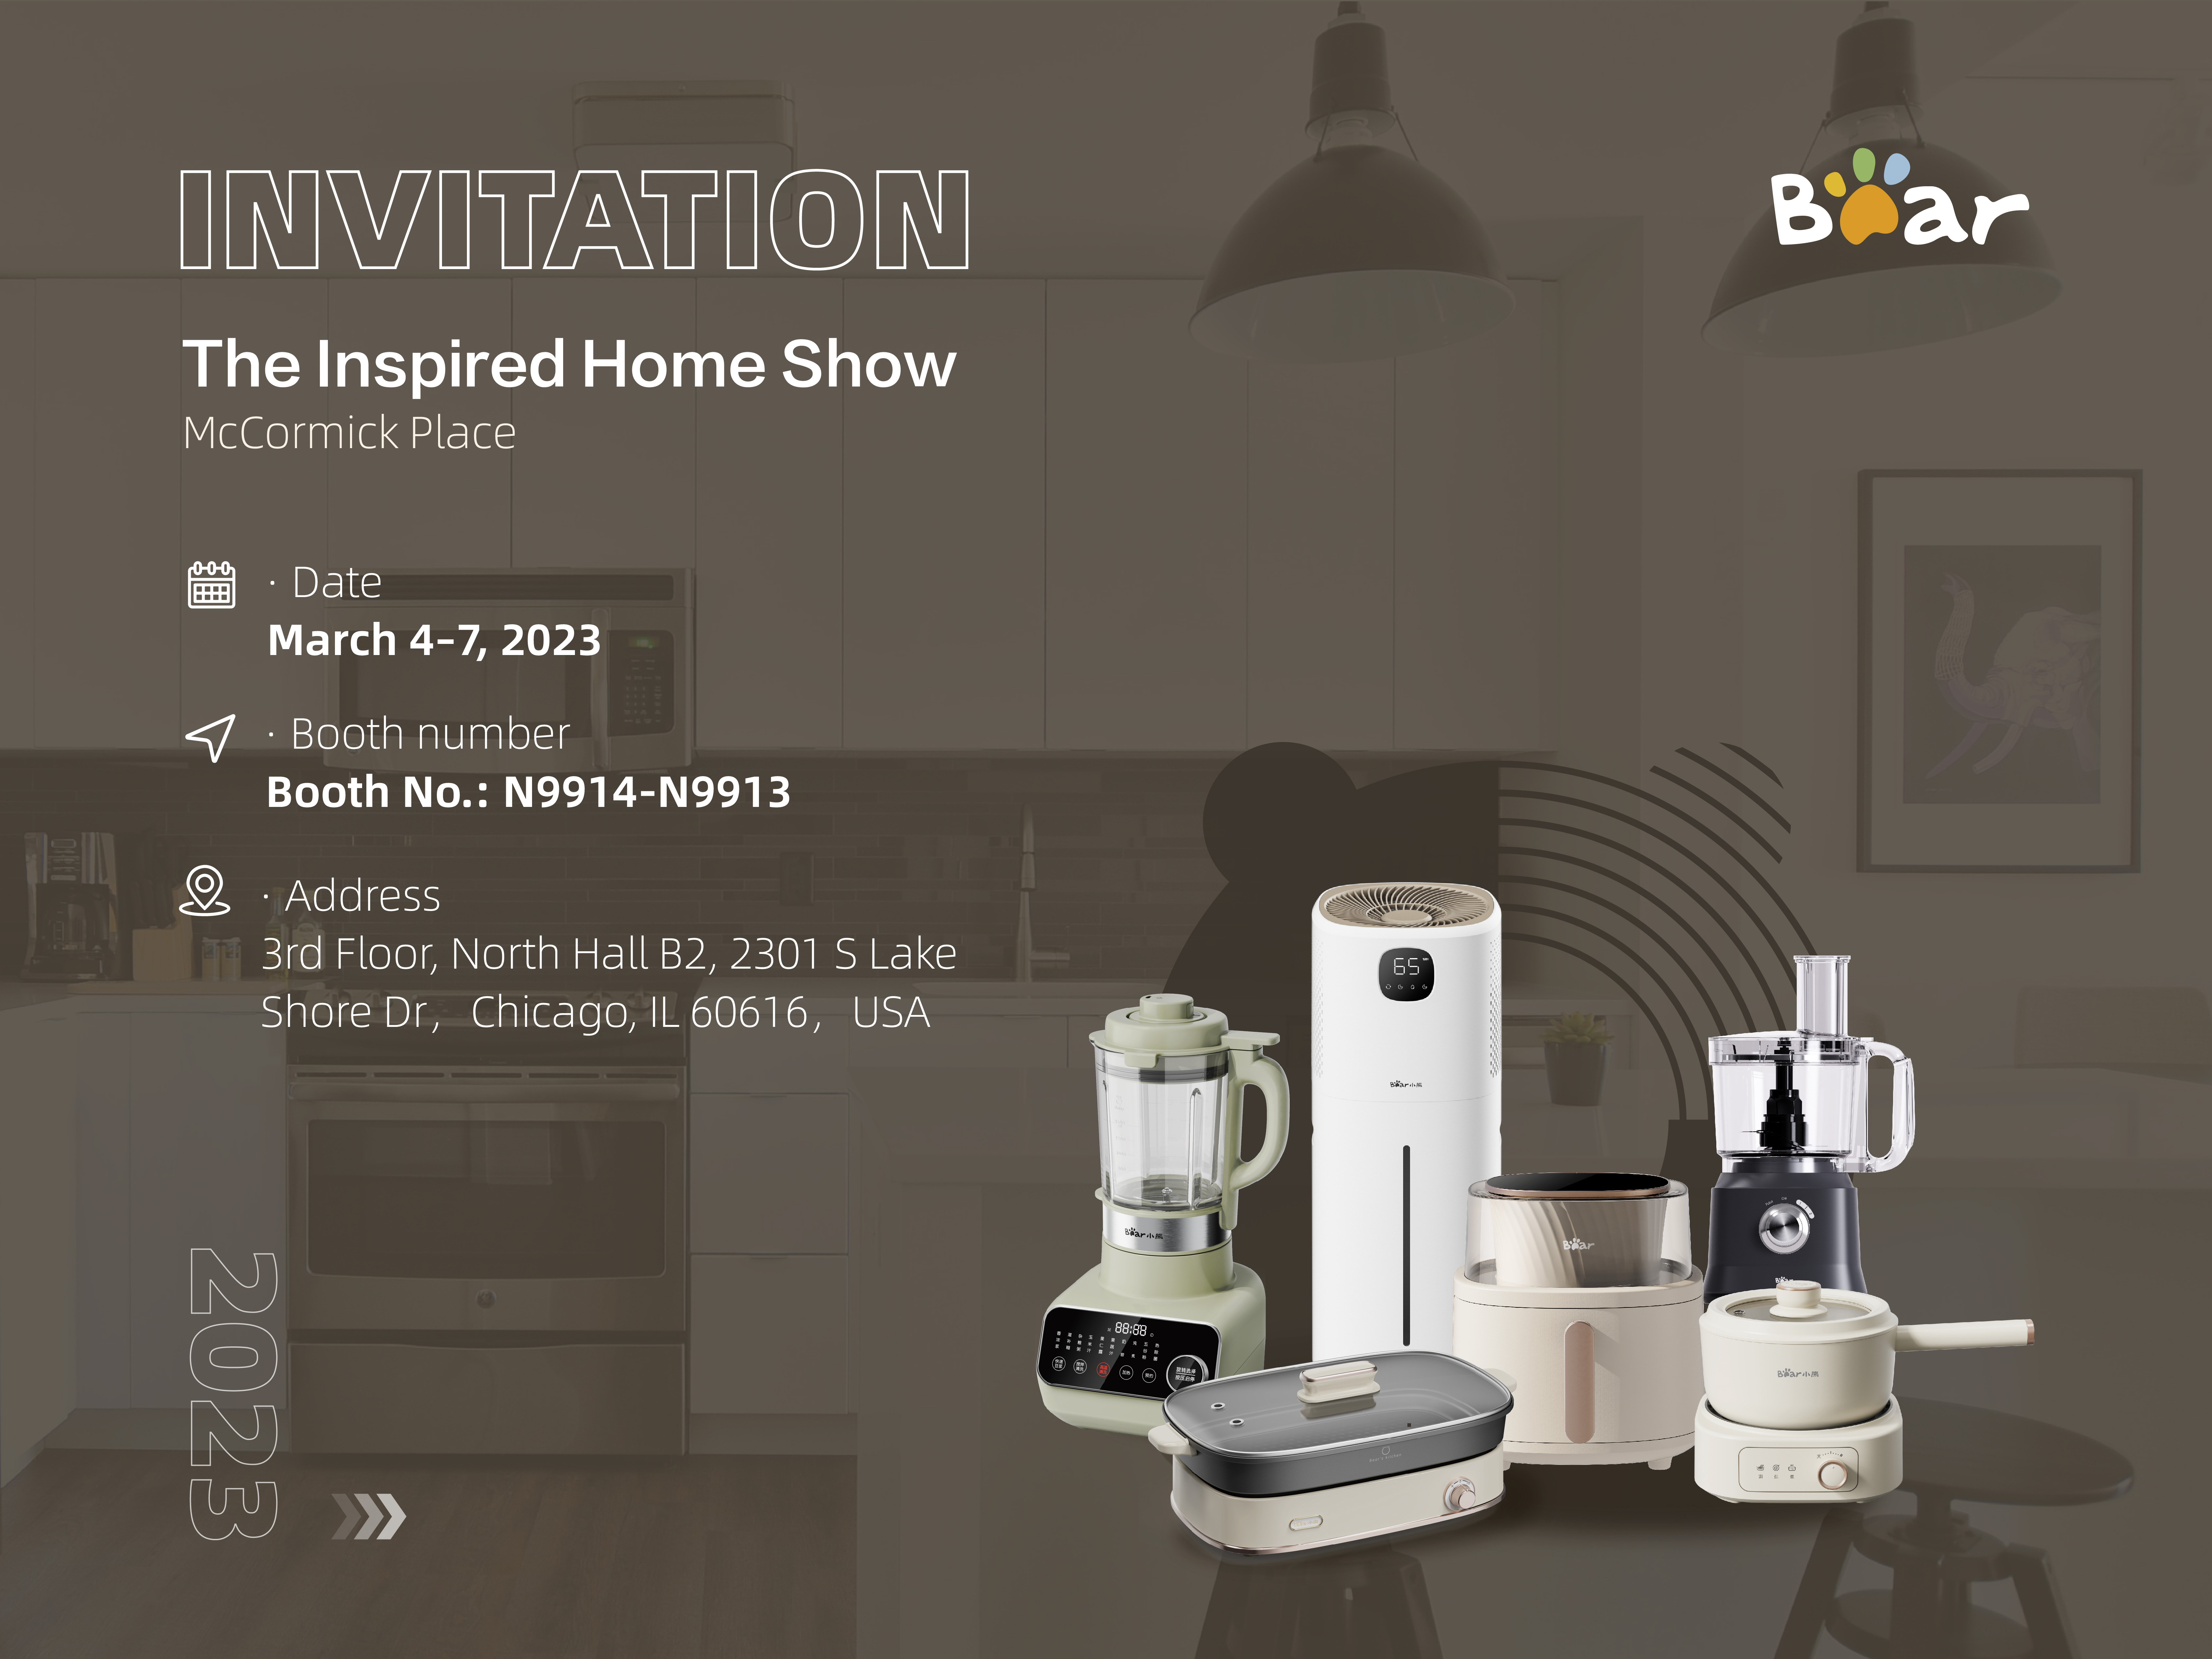 bear at inspired home show